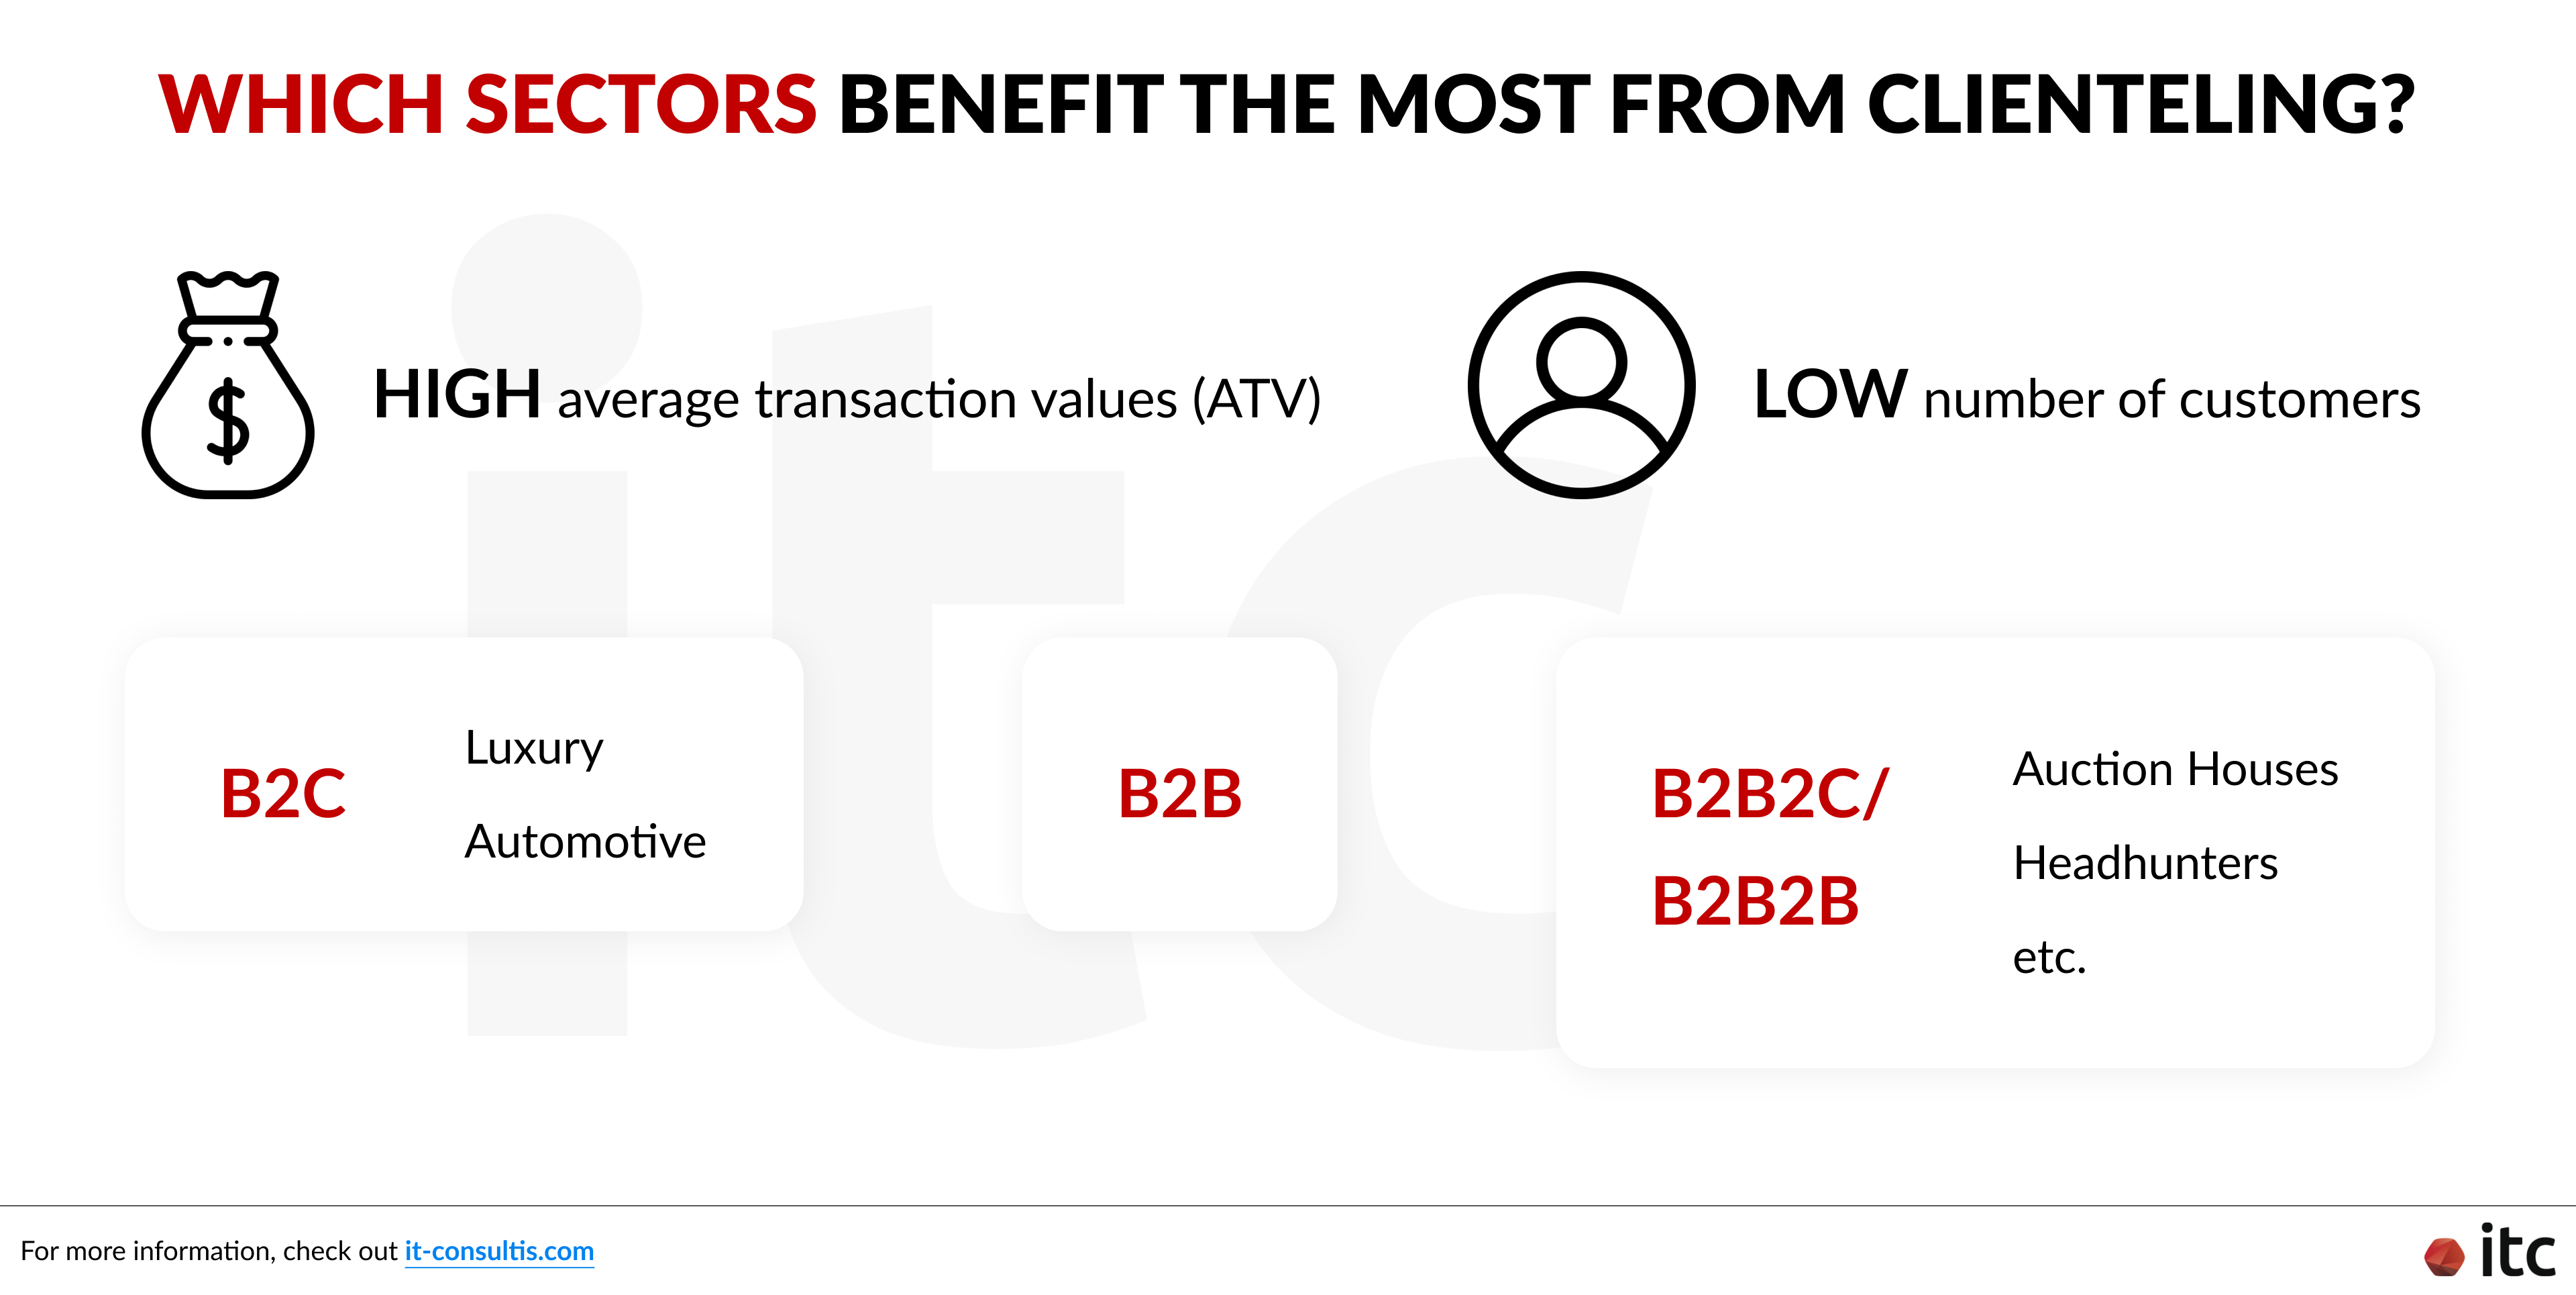 Sectors that benefit the most from clienteling in China are those with high average transaction values (ATV) and a low number of customers